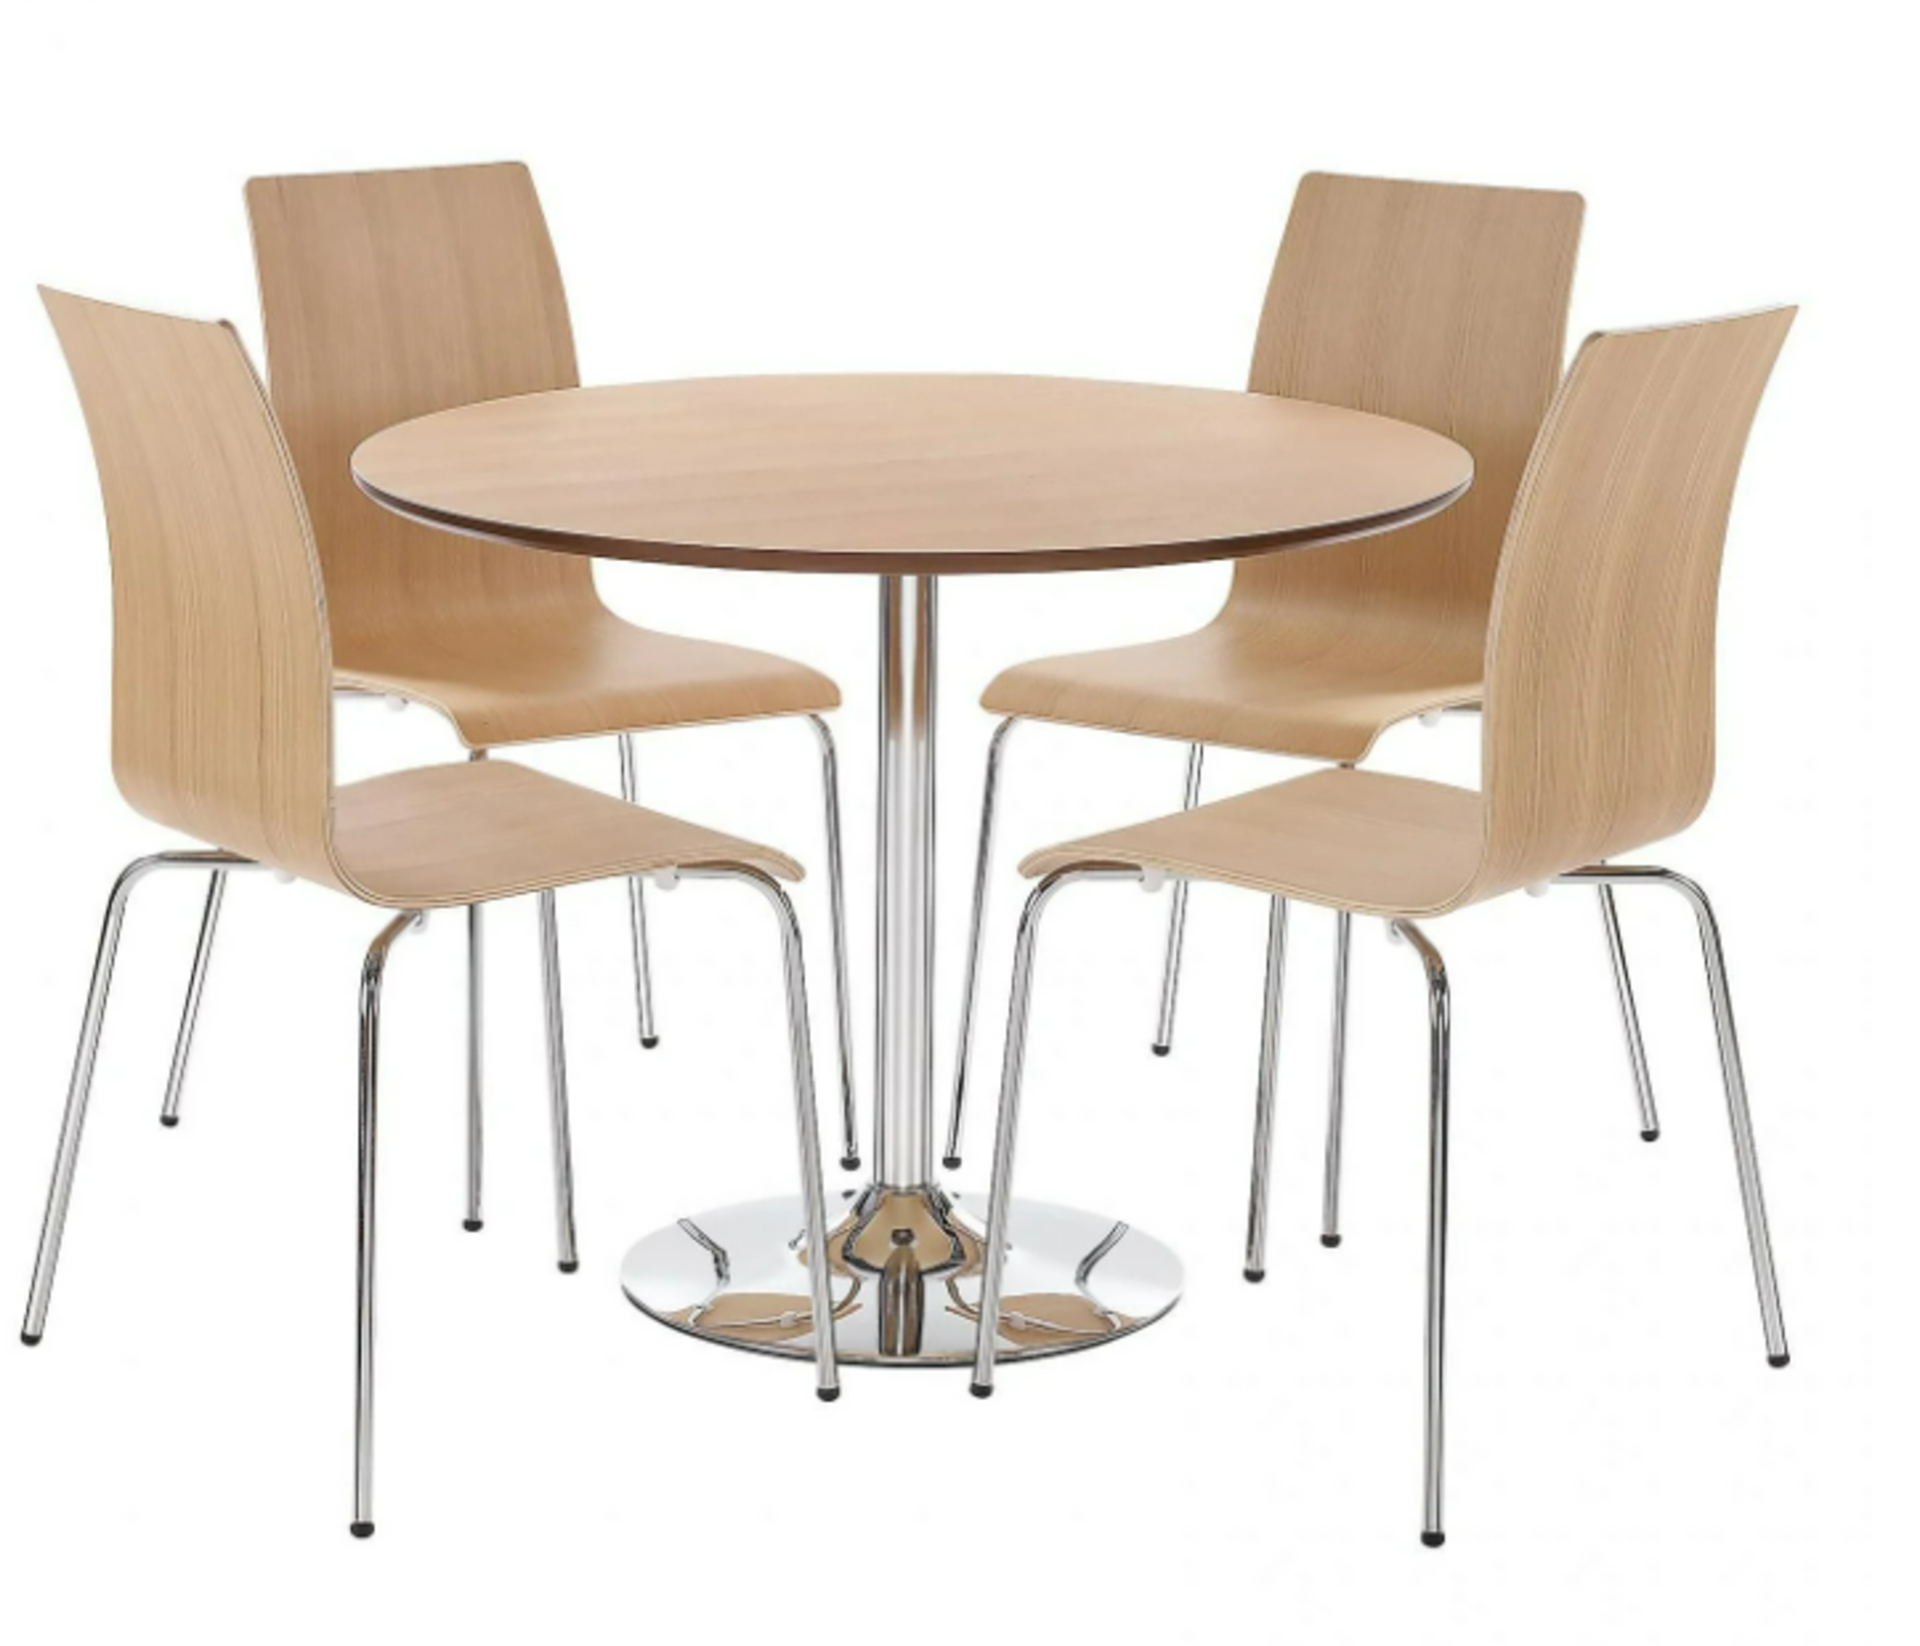 NEW BOXED Set Of Four Soho Oak Veneer Dining Chairs. RRP £120 each, total lot RRP £480. The